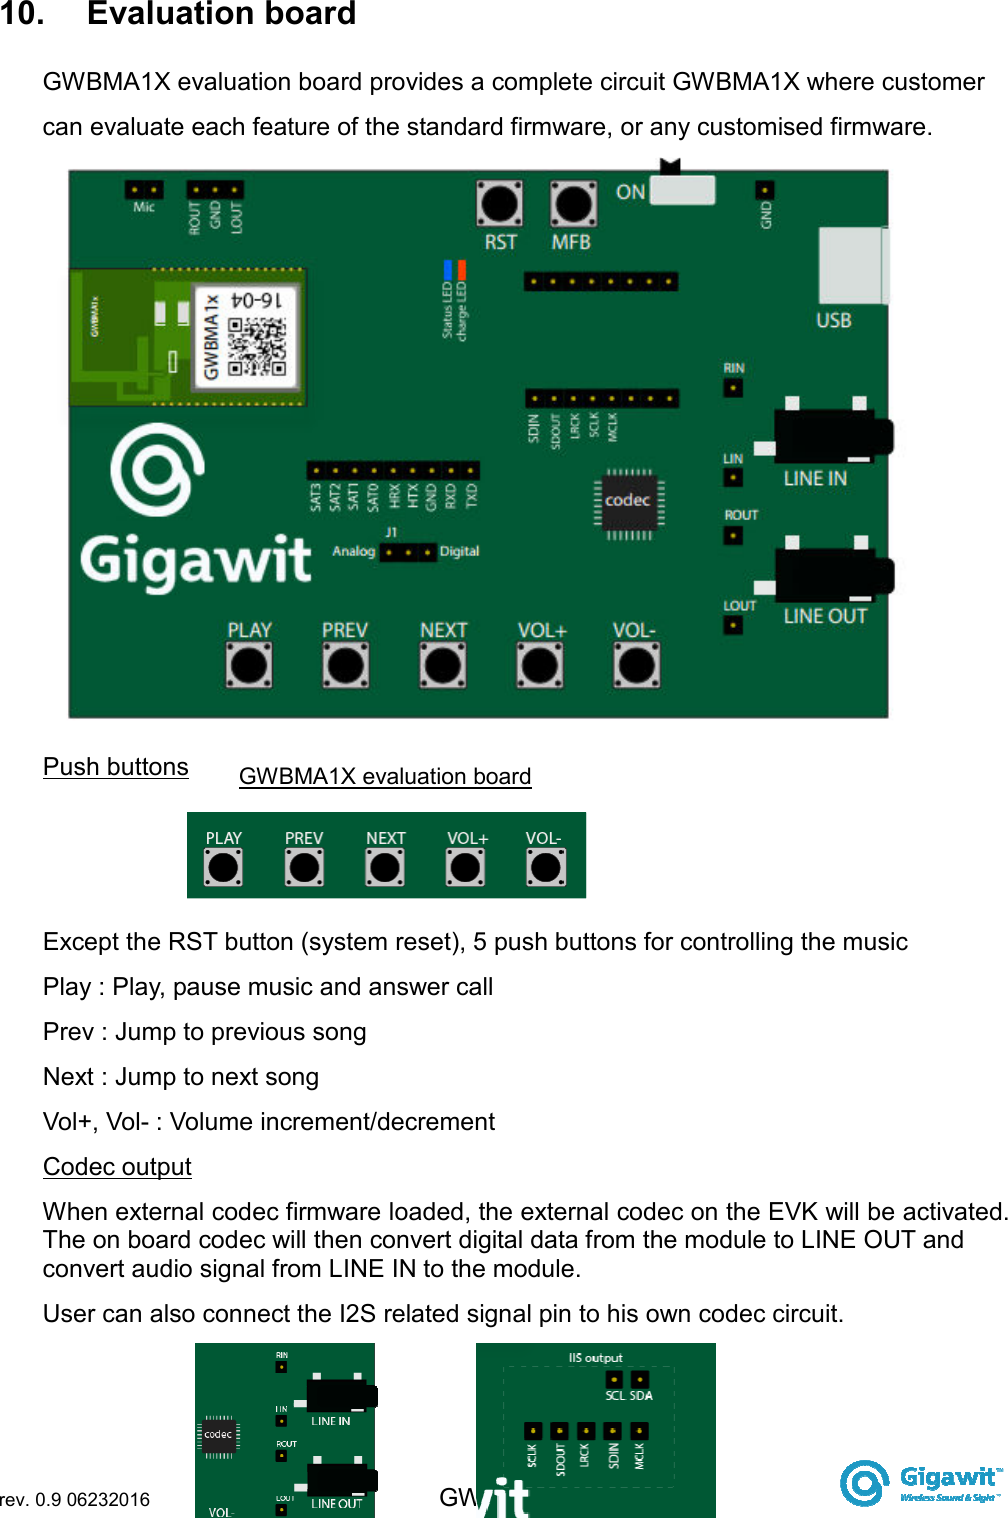  rev. 0.9 06232016 GWBMA1x   10.  Evaluation board GWBMA1X evaluation board provides a complete circuit GWBMA1X where customer  can evaluate each feature of the standard firmware, or any customised firmware.  Push buttons Except the RST button (system reset), 5 push buttons for controlling the music Play : Play, pause music and answer call Prev : Jump to previous song Next : Jump to next song Vol+, Vol- : Volume increment/decrement Codec output When external codec firmware loaded, the external codec on the EVK will be activated. The on board codec will then convert digital data from the module to LINE OUT and convert audio signal from LINE IN to the module.  User can also connect the I2S related signal pin to his own codec circuit. GWBMA1X evaluation board 